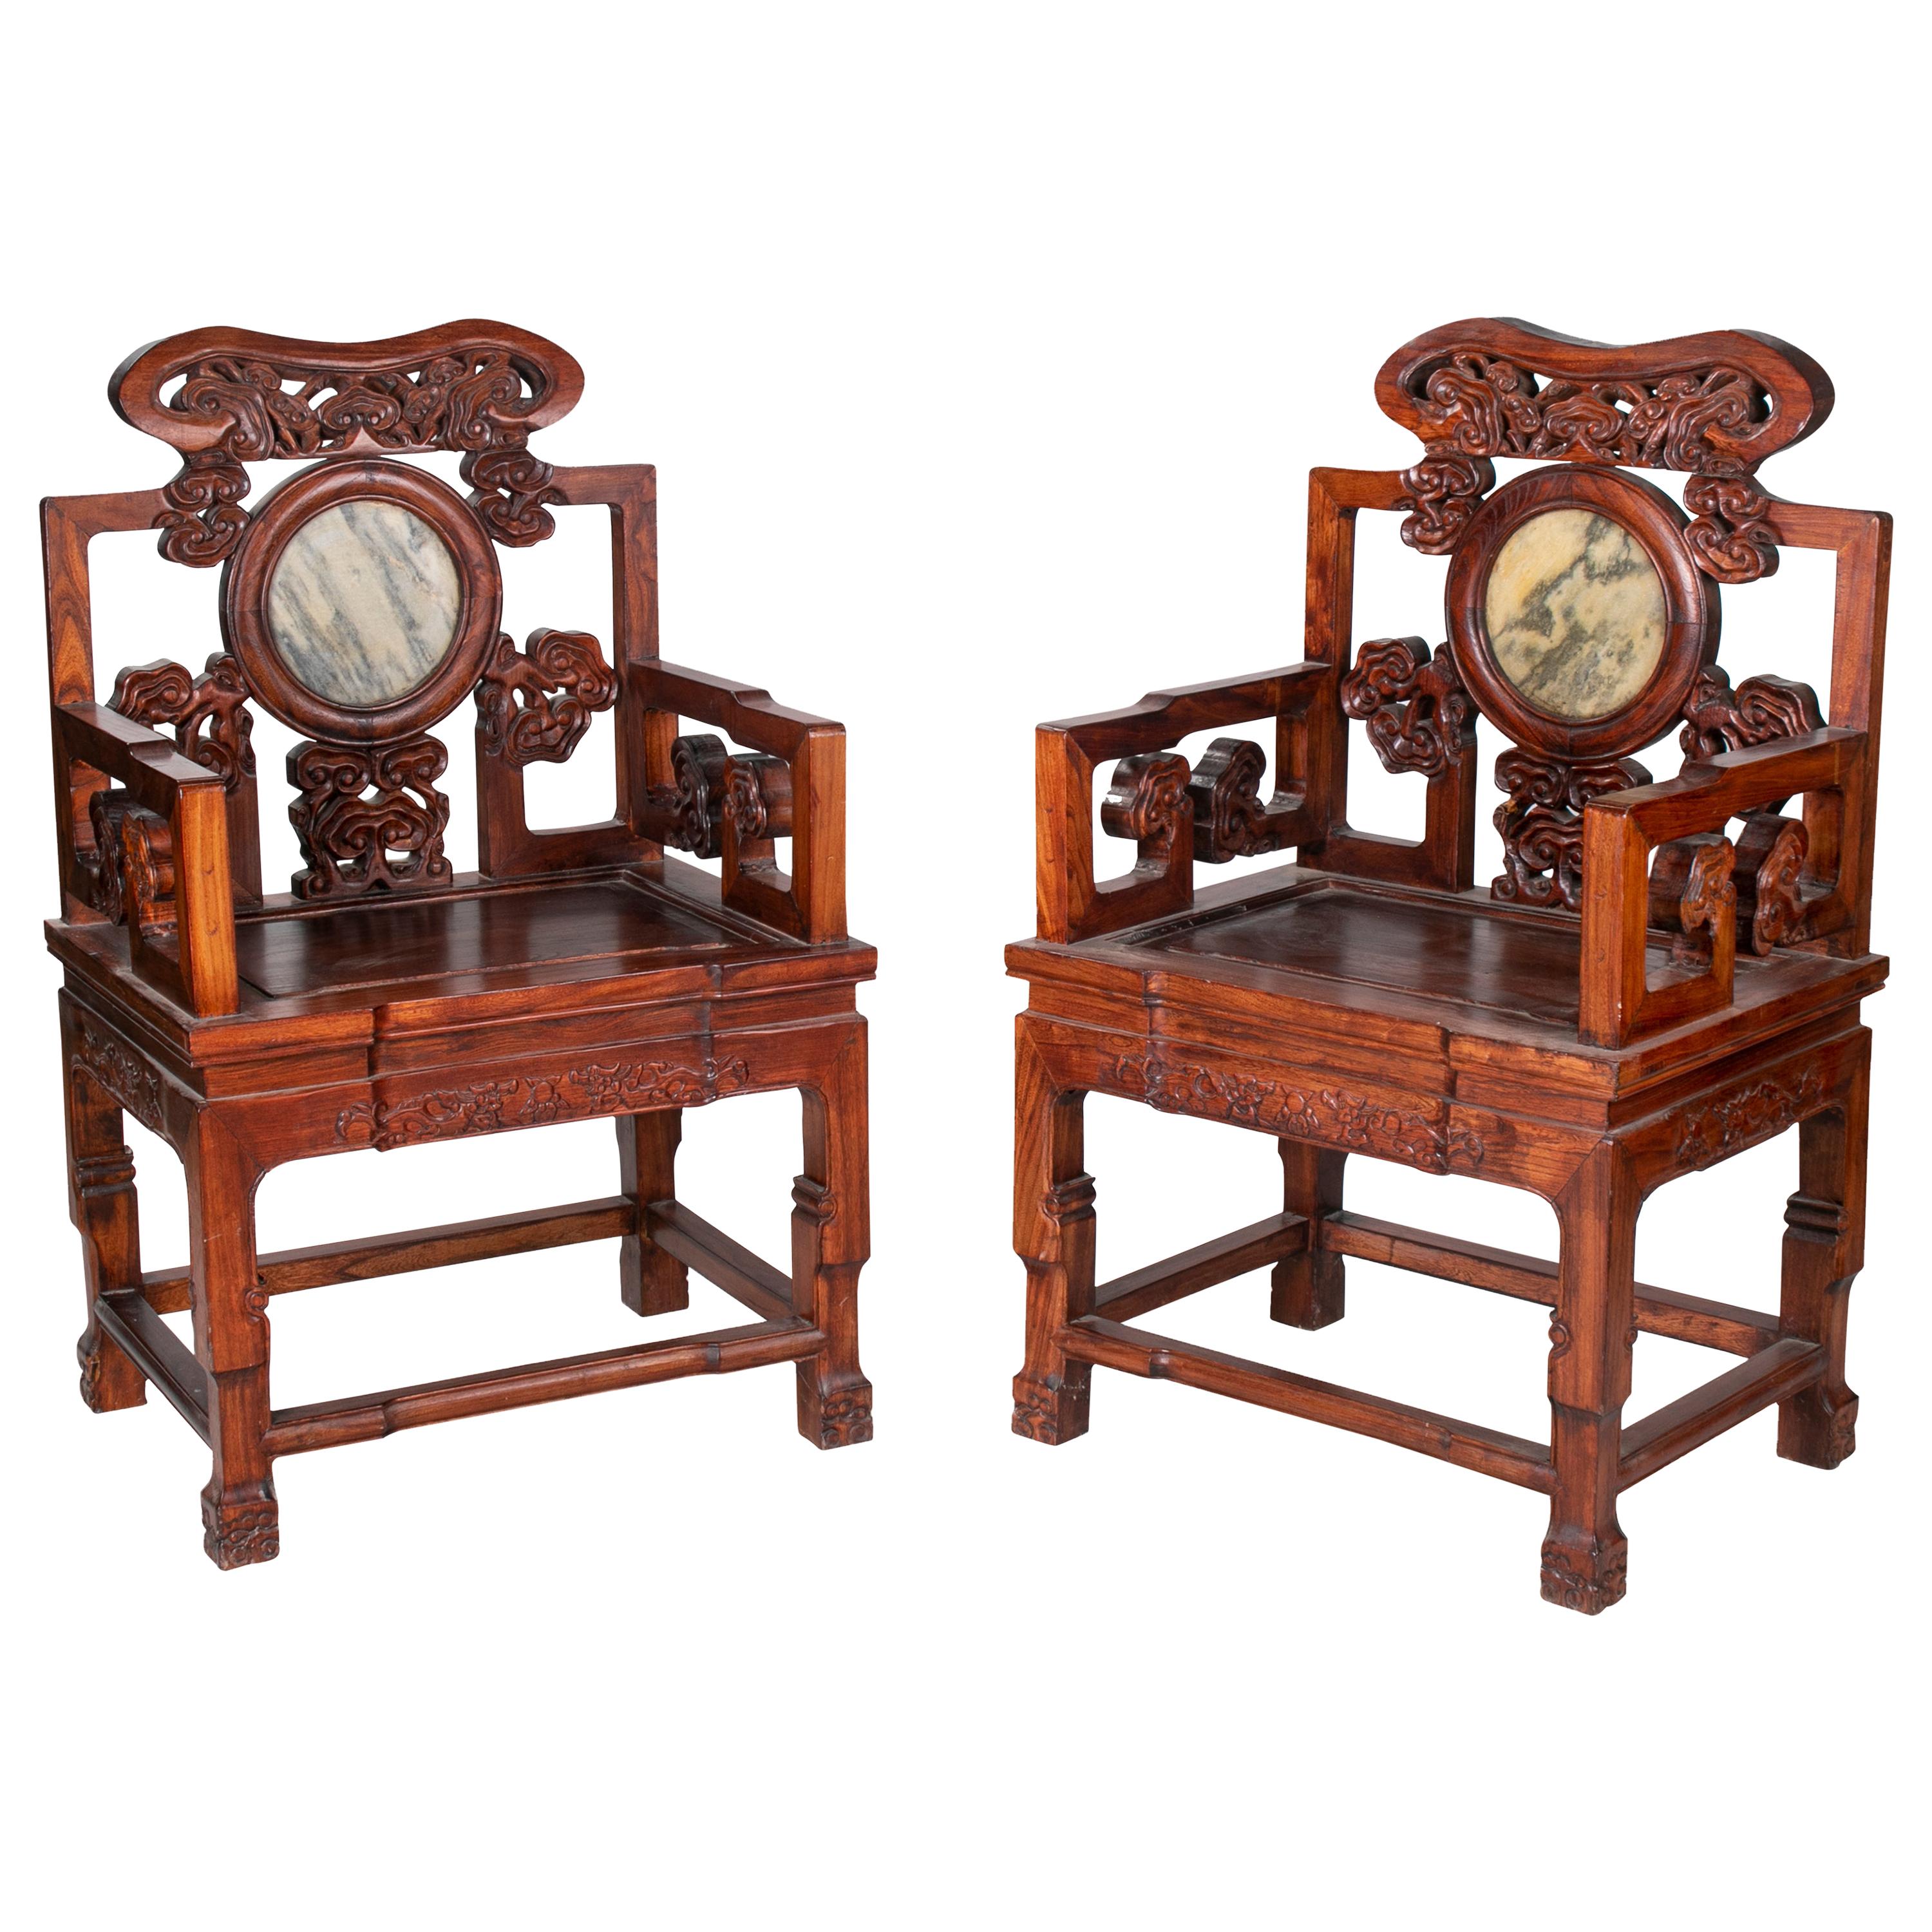 1950s Pair of Chinese Chairs with Inset Round Stone in Back Rest